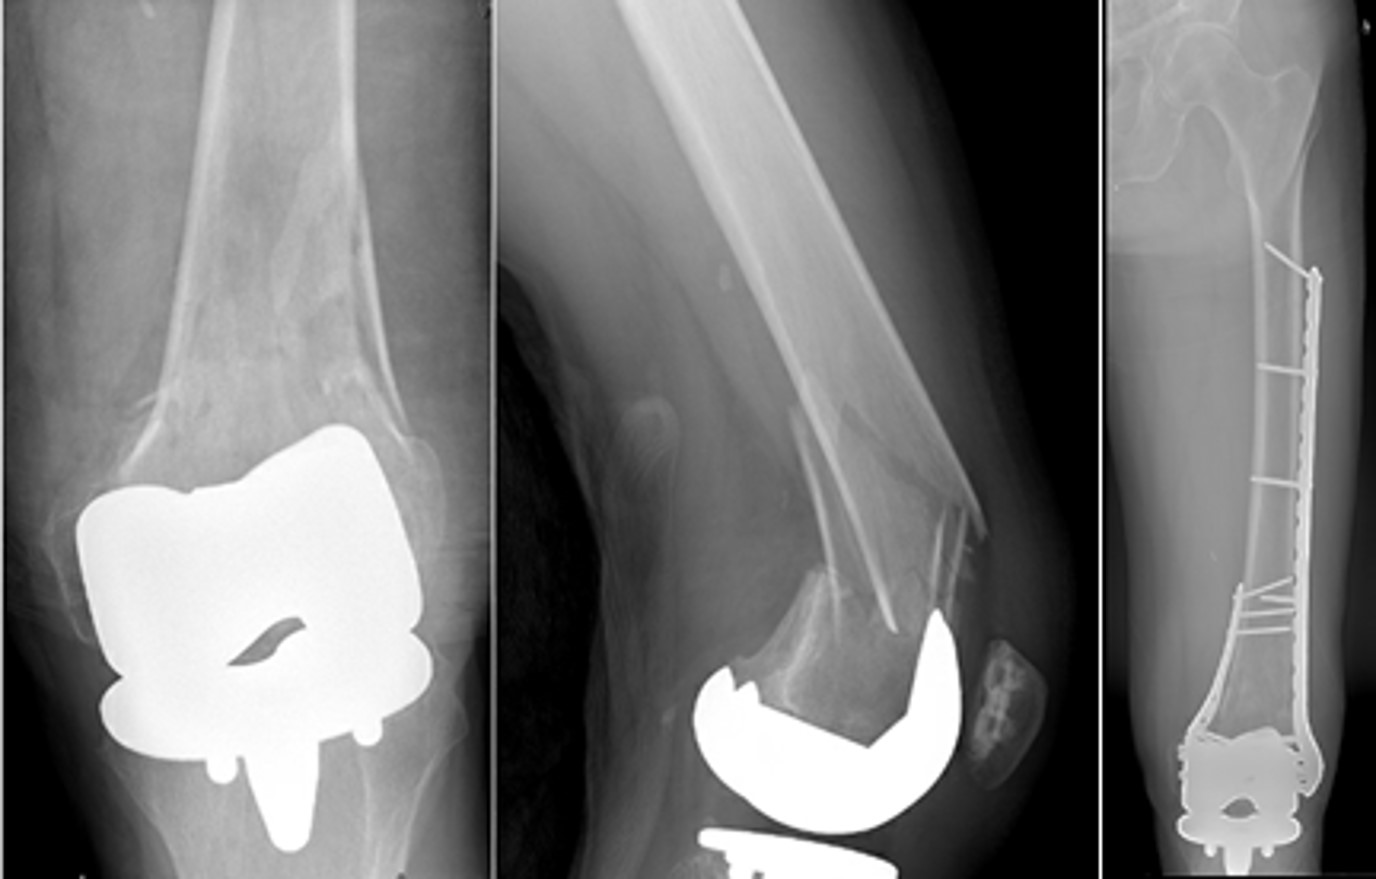 Showcase Image for Dual Plating of Periprosthetic Distal Femur Fractures Leads to Near Anatomic Coronal Plane